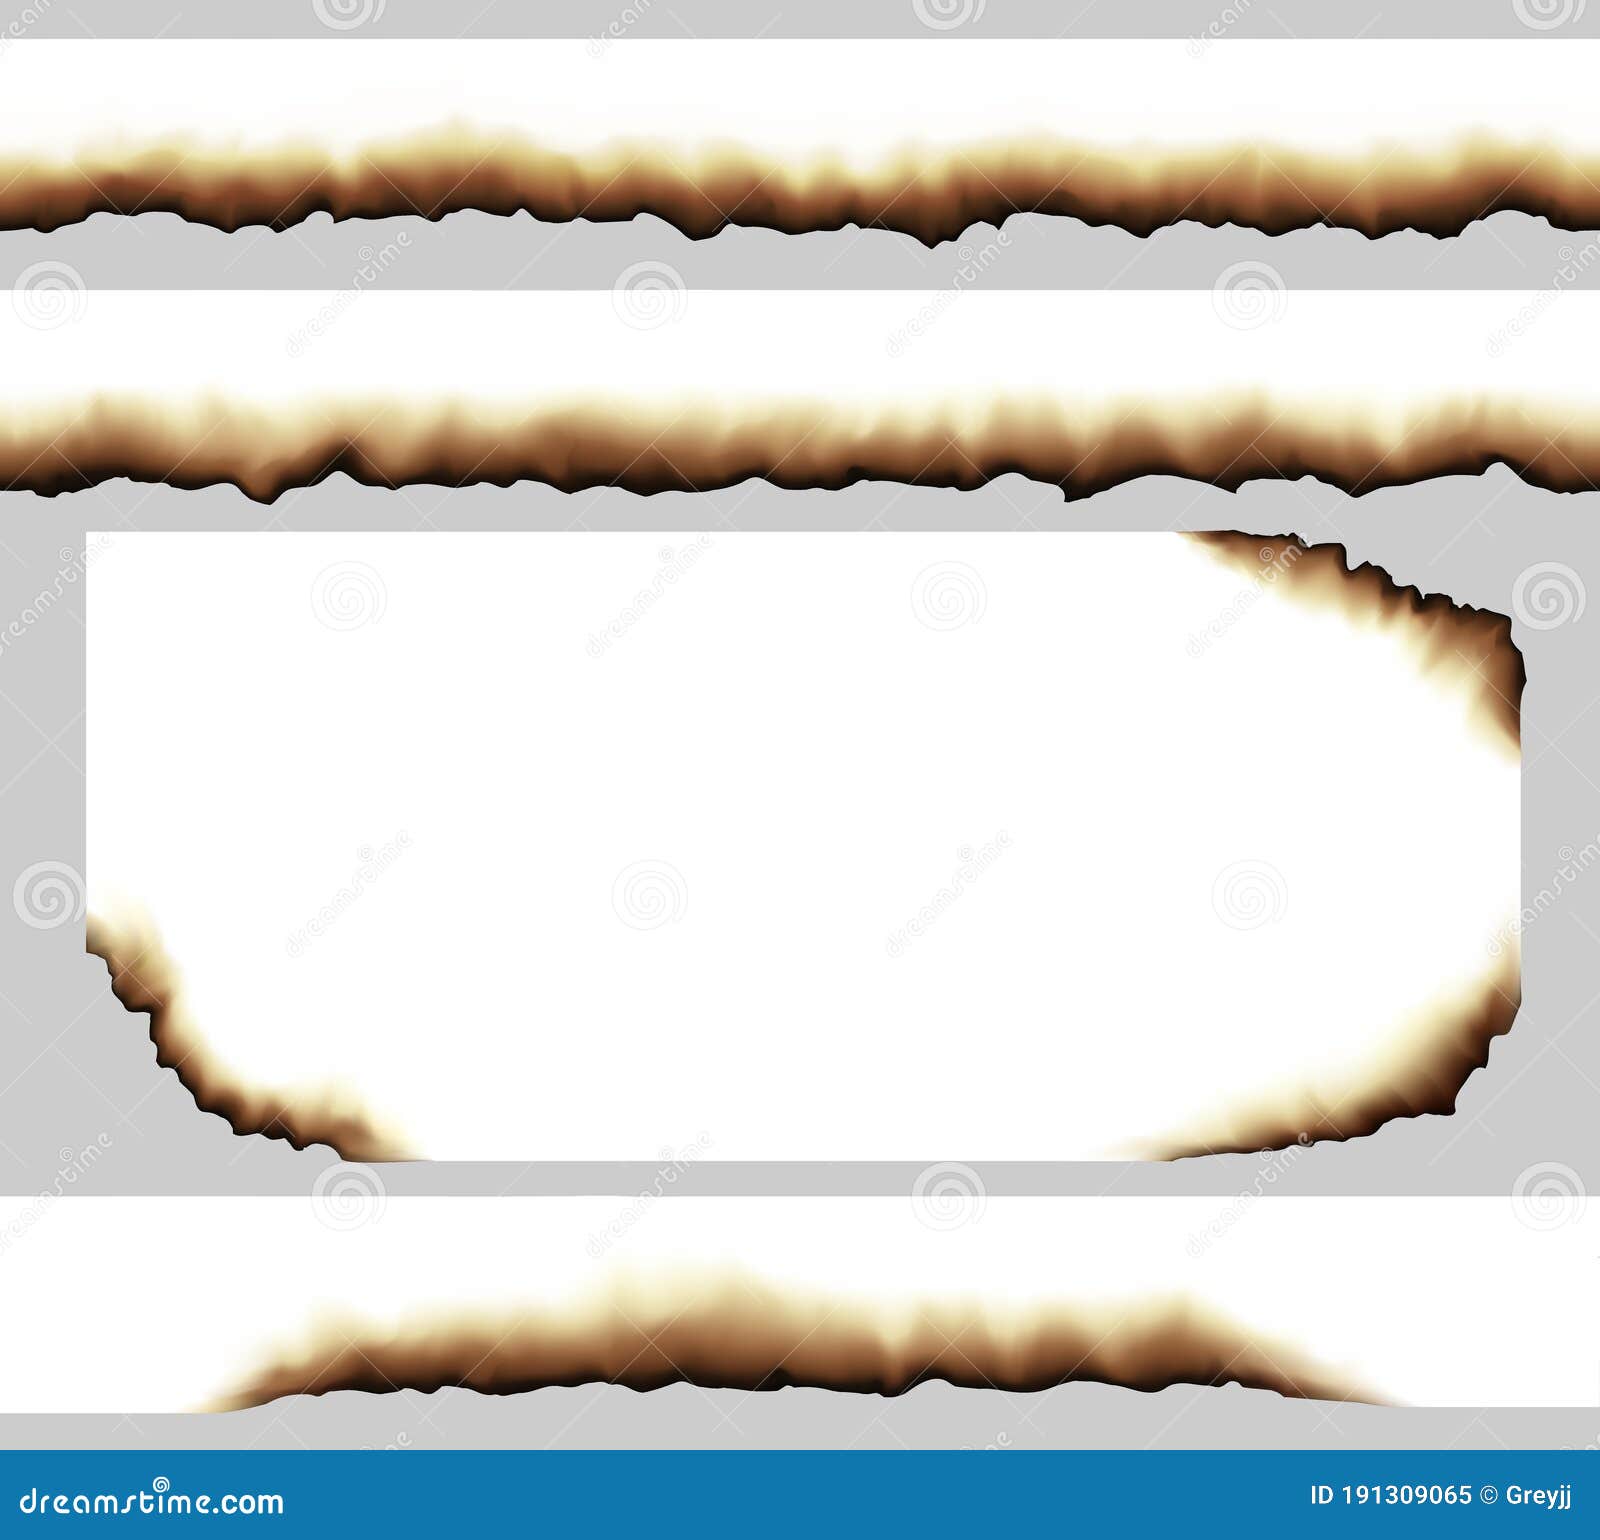 Realistic Vector Burned Paper Edges And Corners Stock Vector Illustration Of Edge Burned 